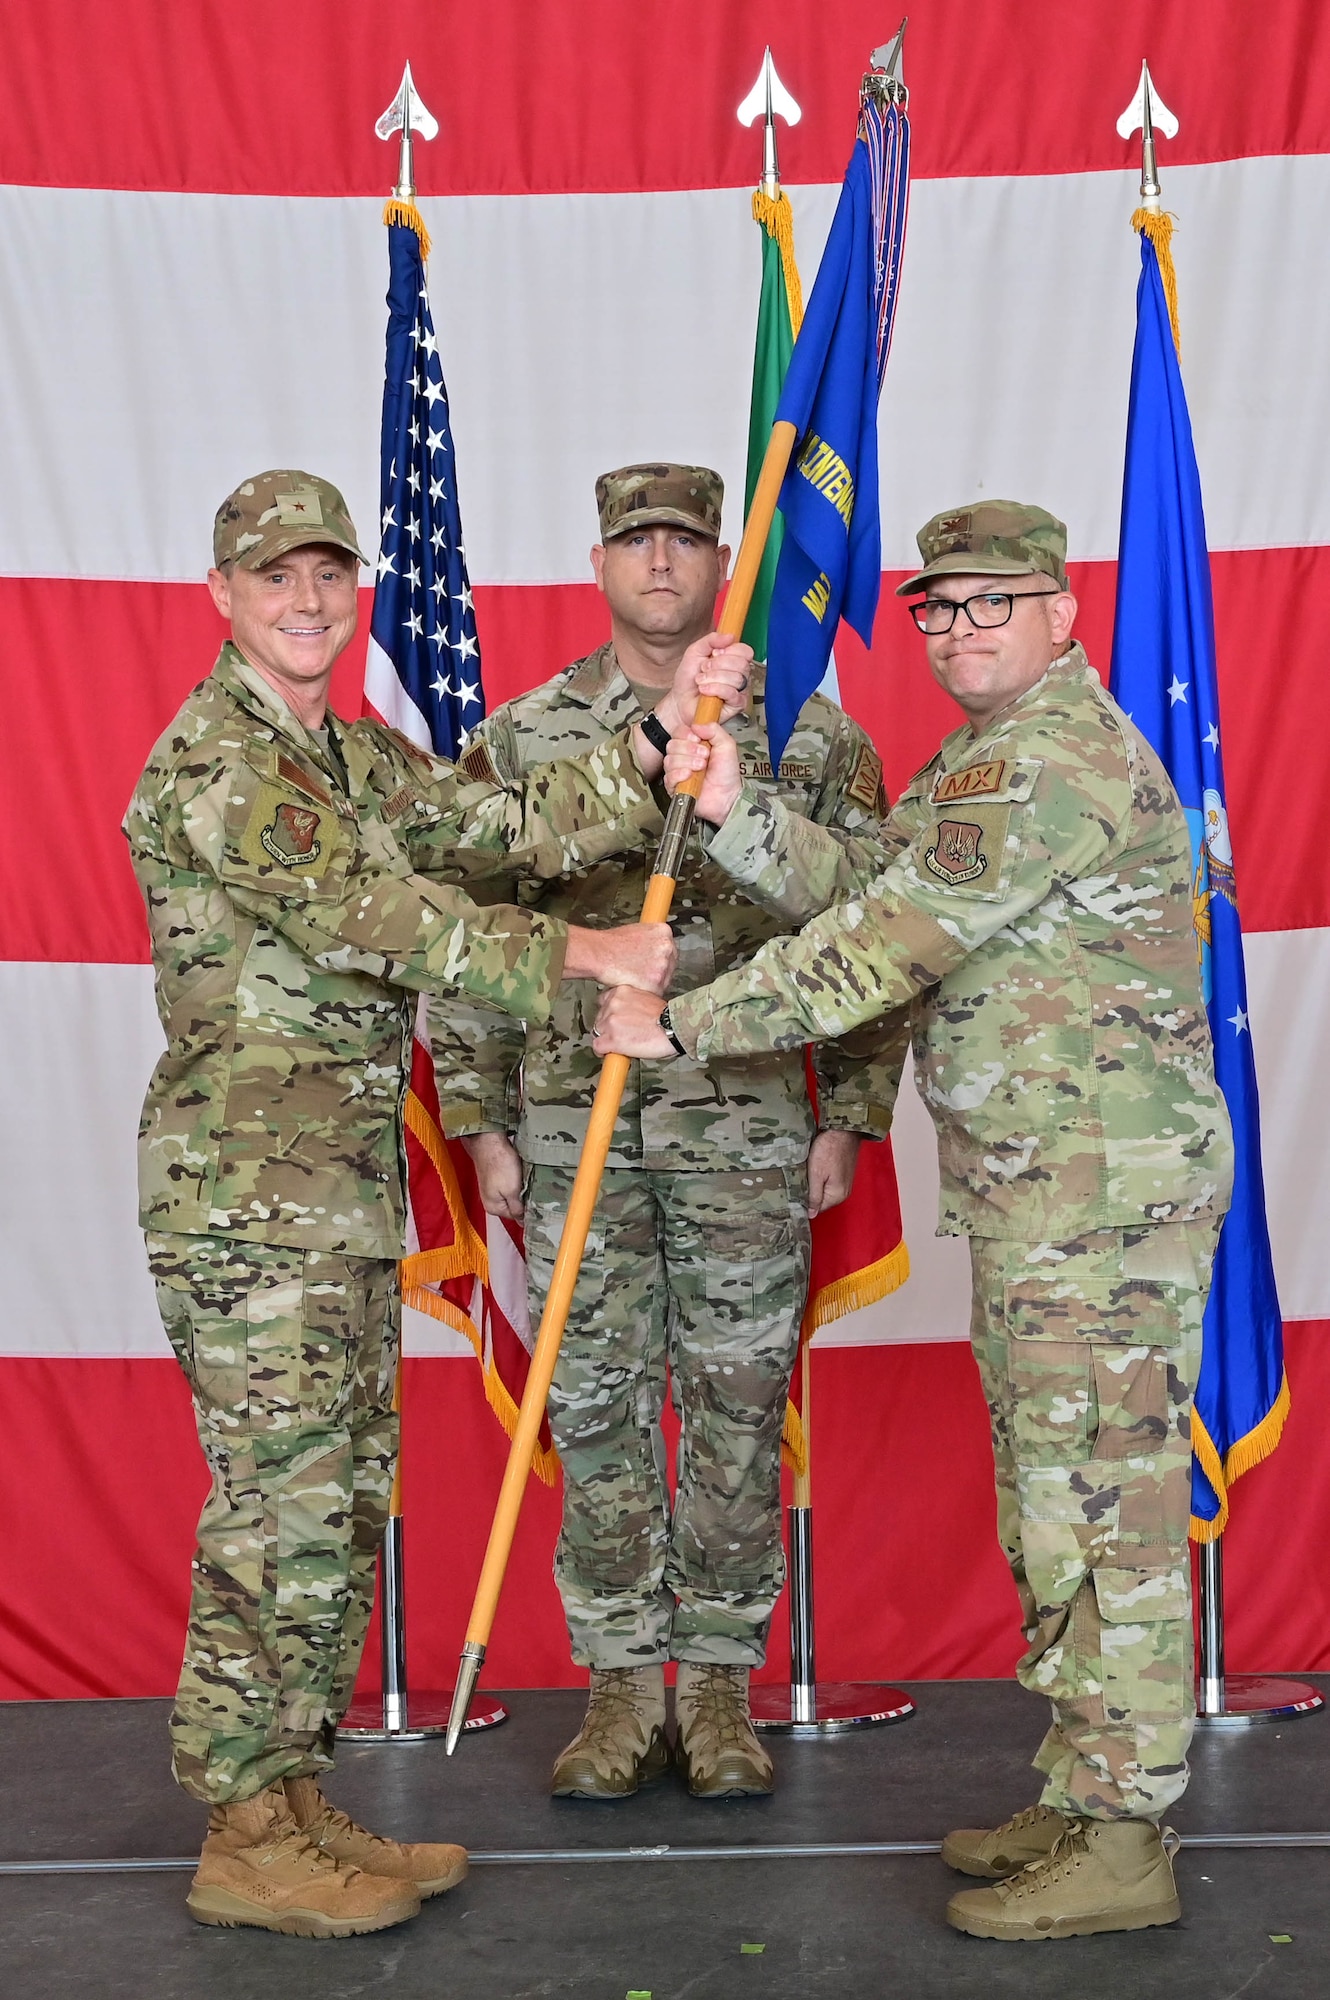 U.S. Air Force Brig. Gen. Tad Clark, 31st Fighter Wing commander, receives the guidon from U.S Air Force Col. Jason Mitchell, 31st Maintenance Group outgoing commander, to symbolize the changing of command at Aviano Air Base, Italy, June 15, 2023. The mission of the 31st Maintenance Group is to provide peacetime and combat maintenance and munitions control, and executive support for the 31st Fighter Wing, geographically separated units under the command and control of the wing, and units gained during advanced stages of readiness. (U.S. Air Force photo by Airman Zachary Jakel)